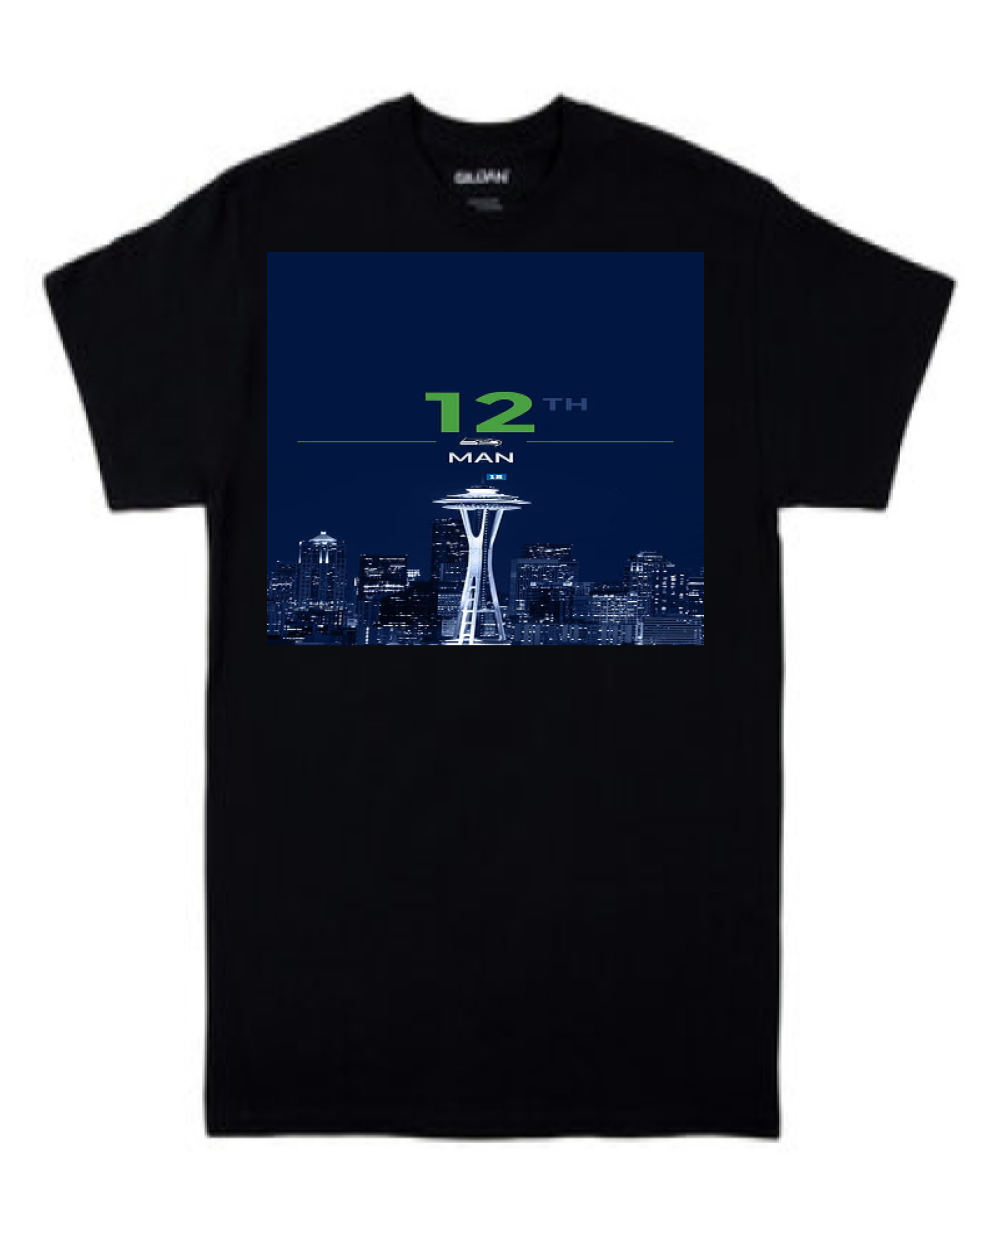 Seattle Football Adult & Youth T-shirts